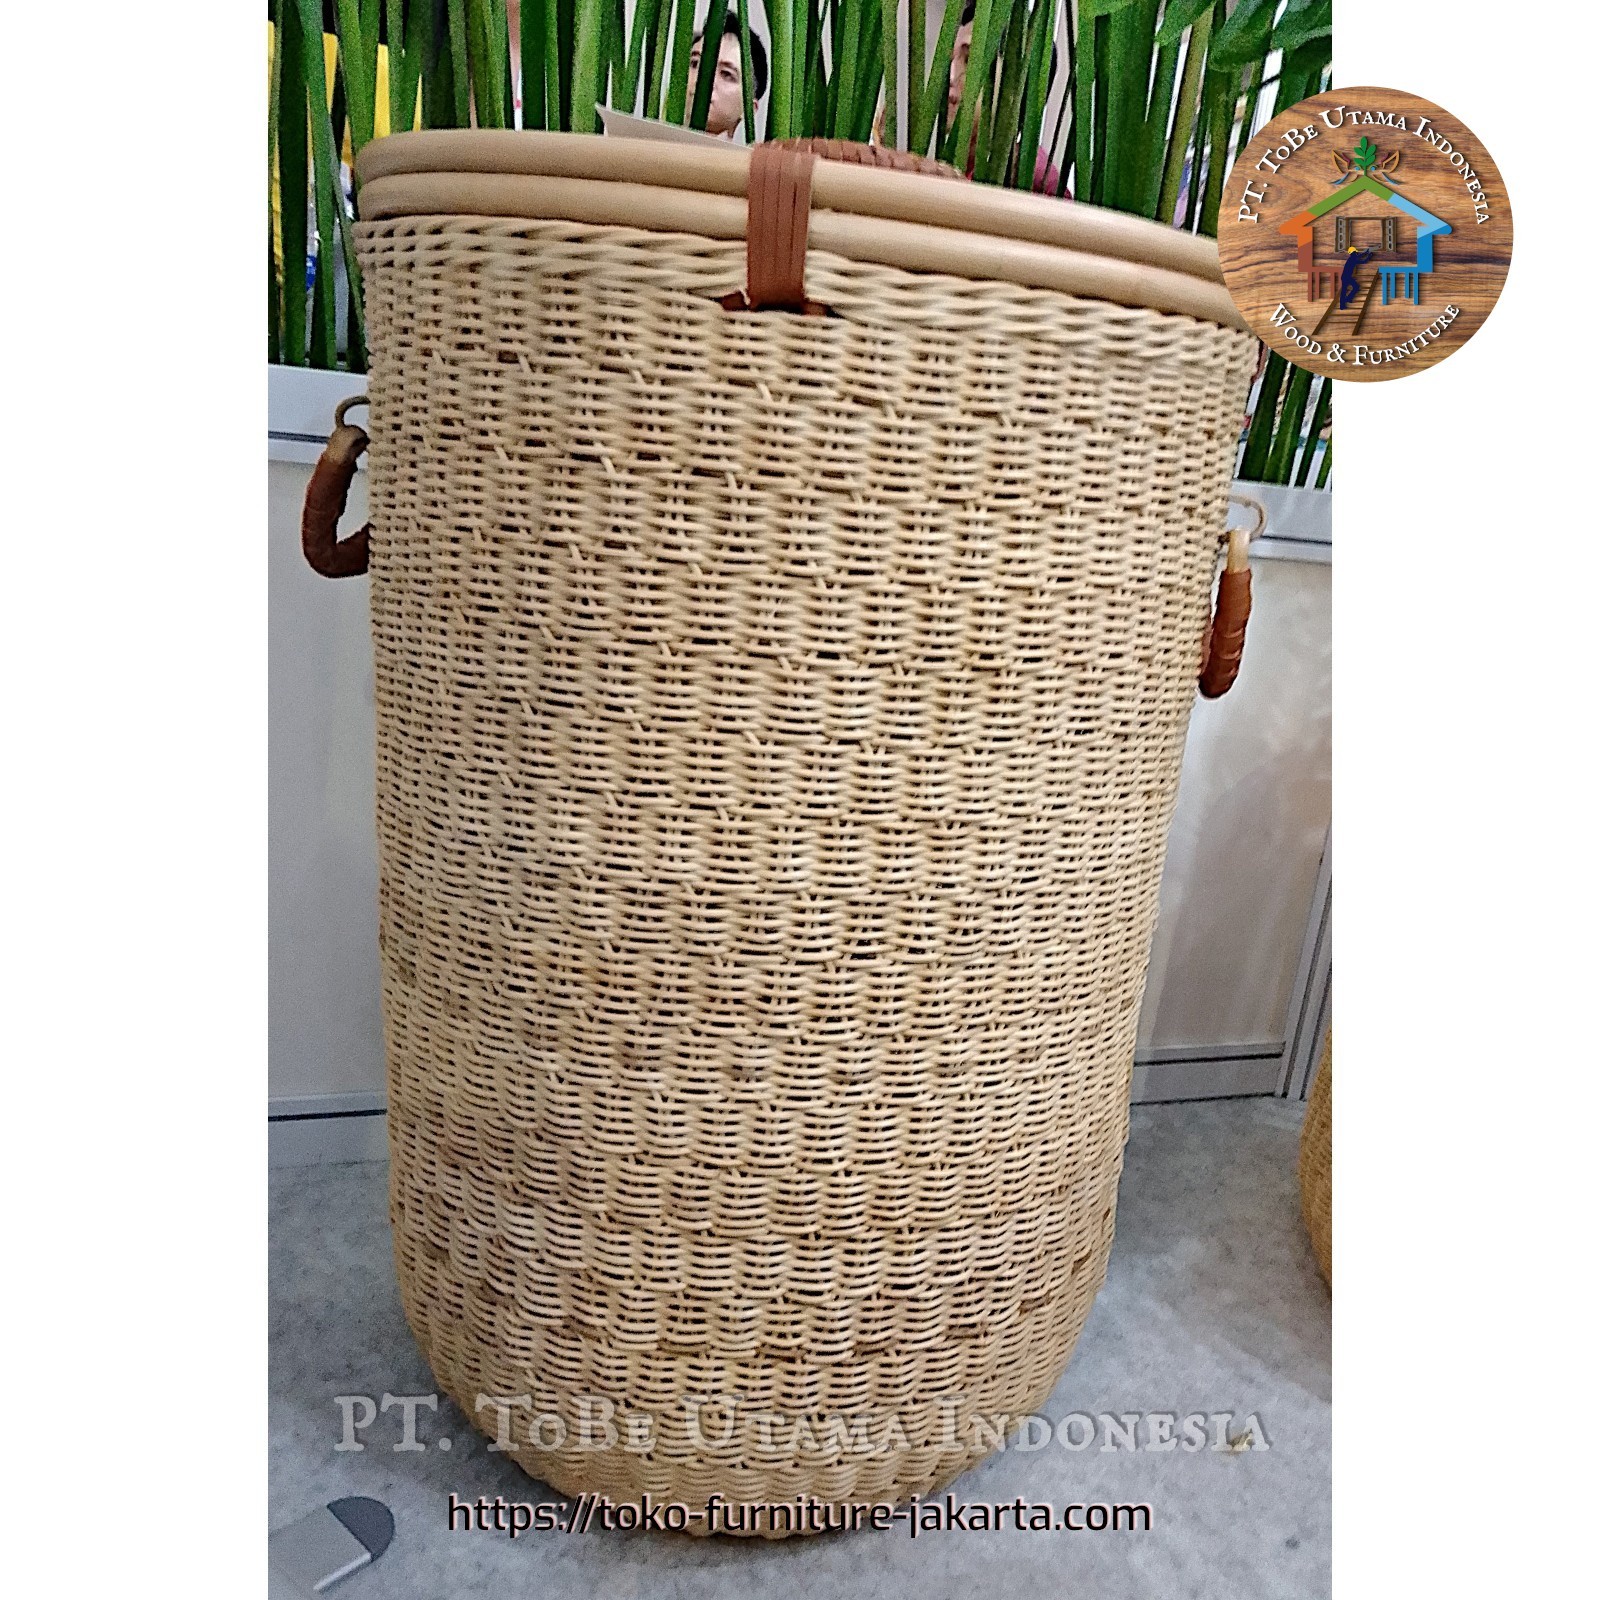 Accessories: Pot Plant Holder made of rattan (image 1 of 1).